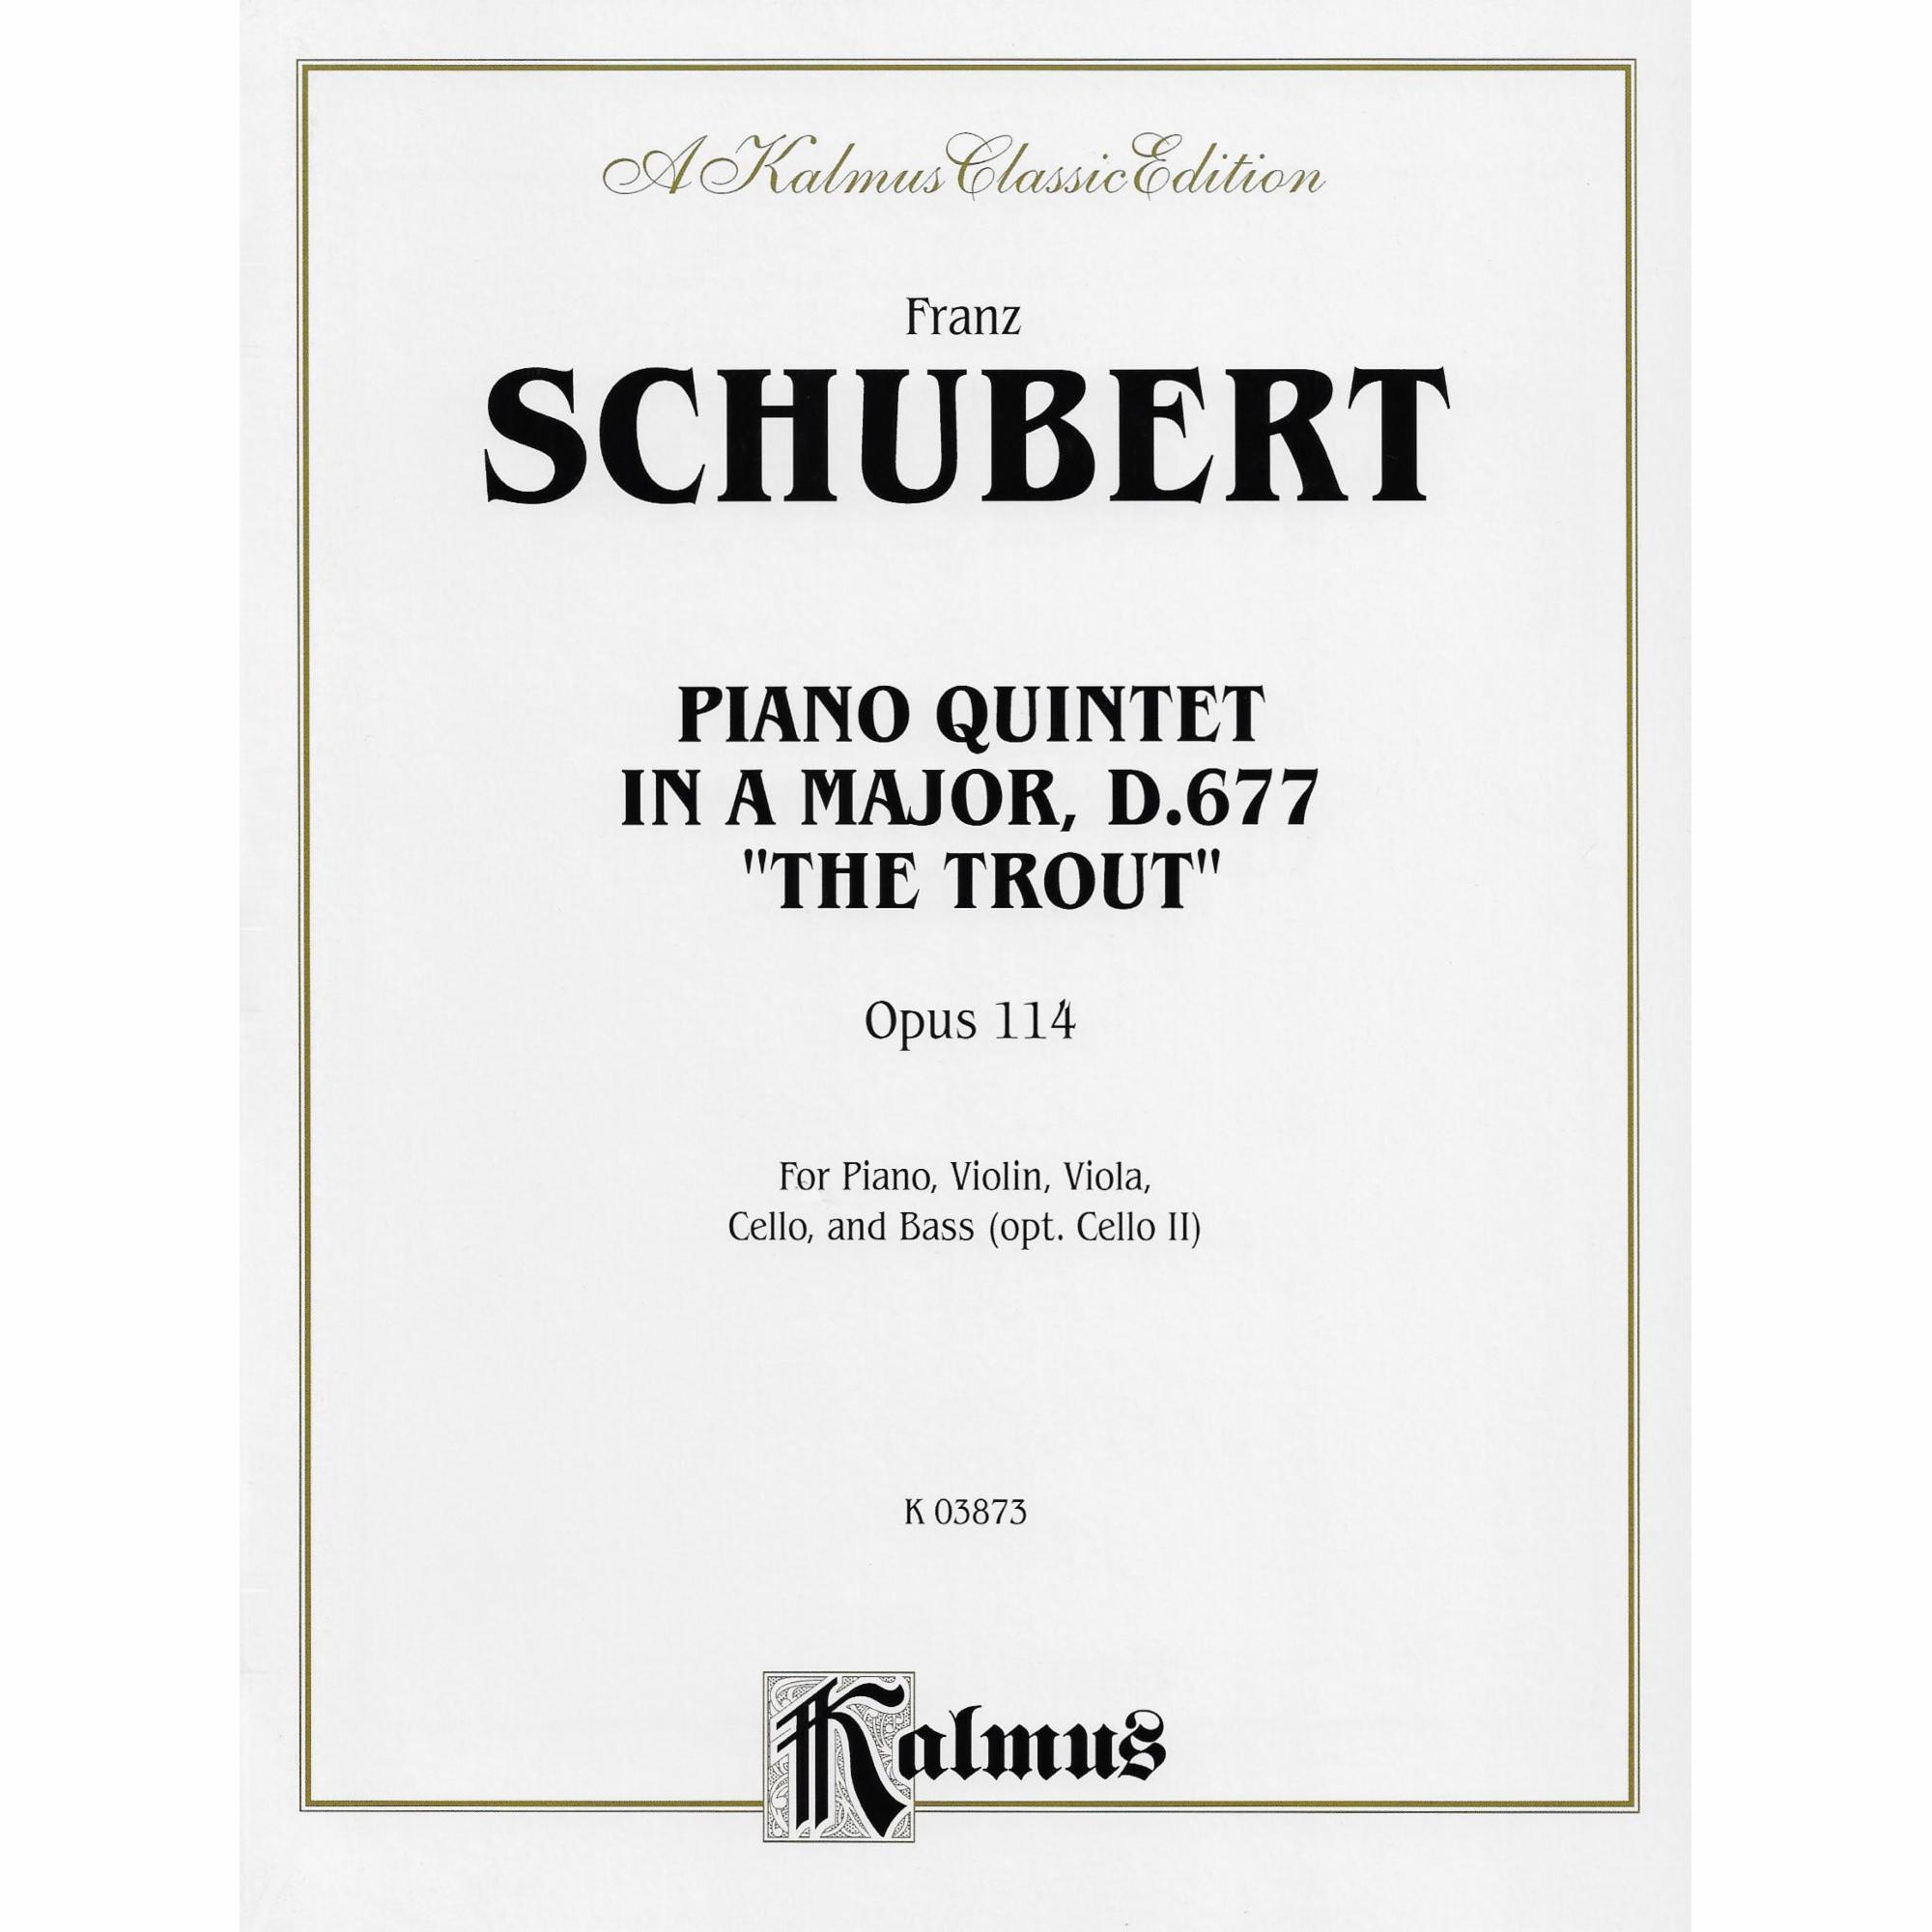 Schubert -- Piano Quintet in A Major, D. 677 (The Trout) | Southwest Strings